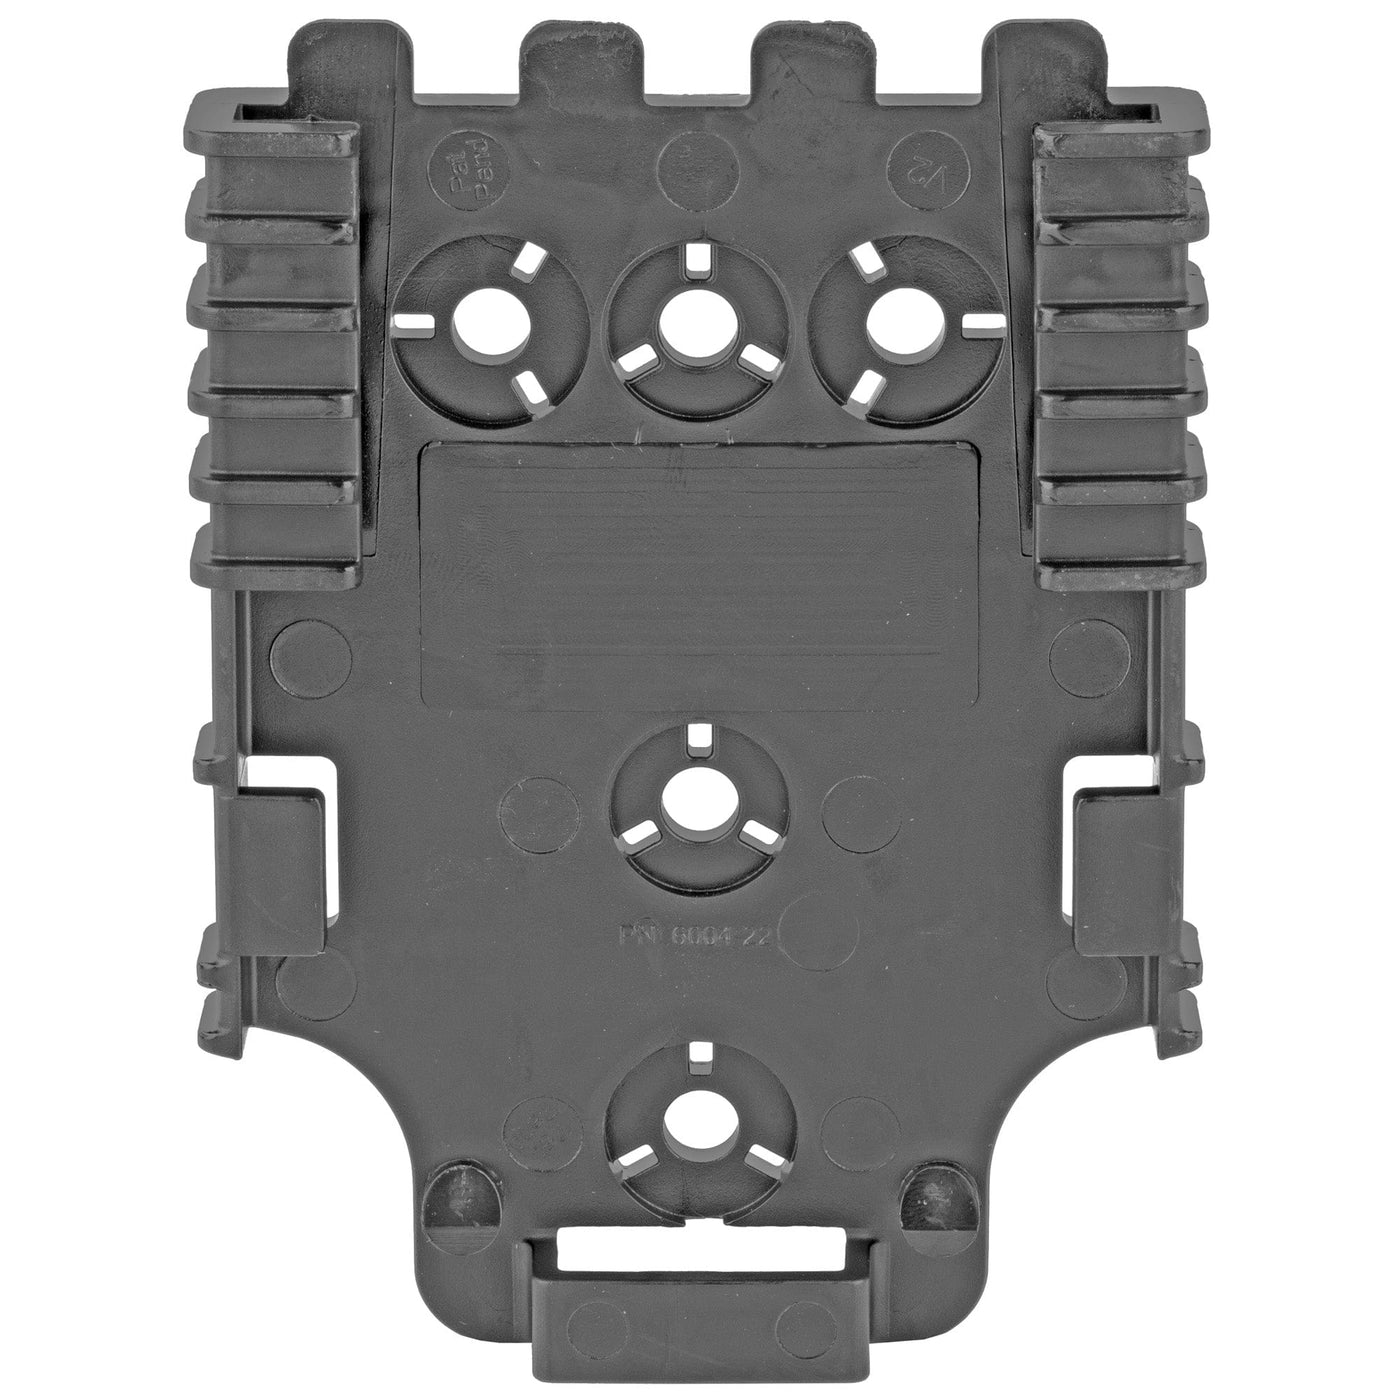 Safariland Sl 6004 Duty Rcvr Plate With Dual Holsters